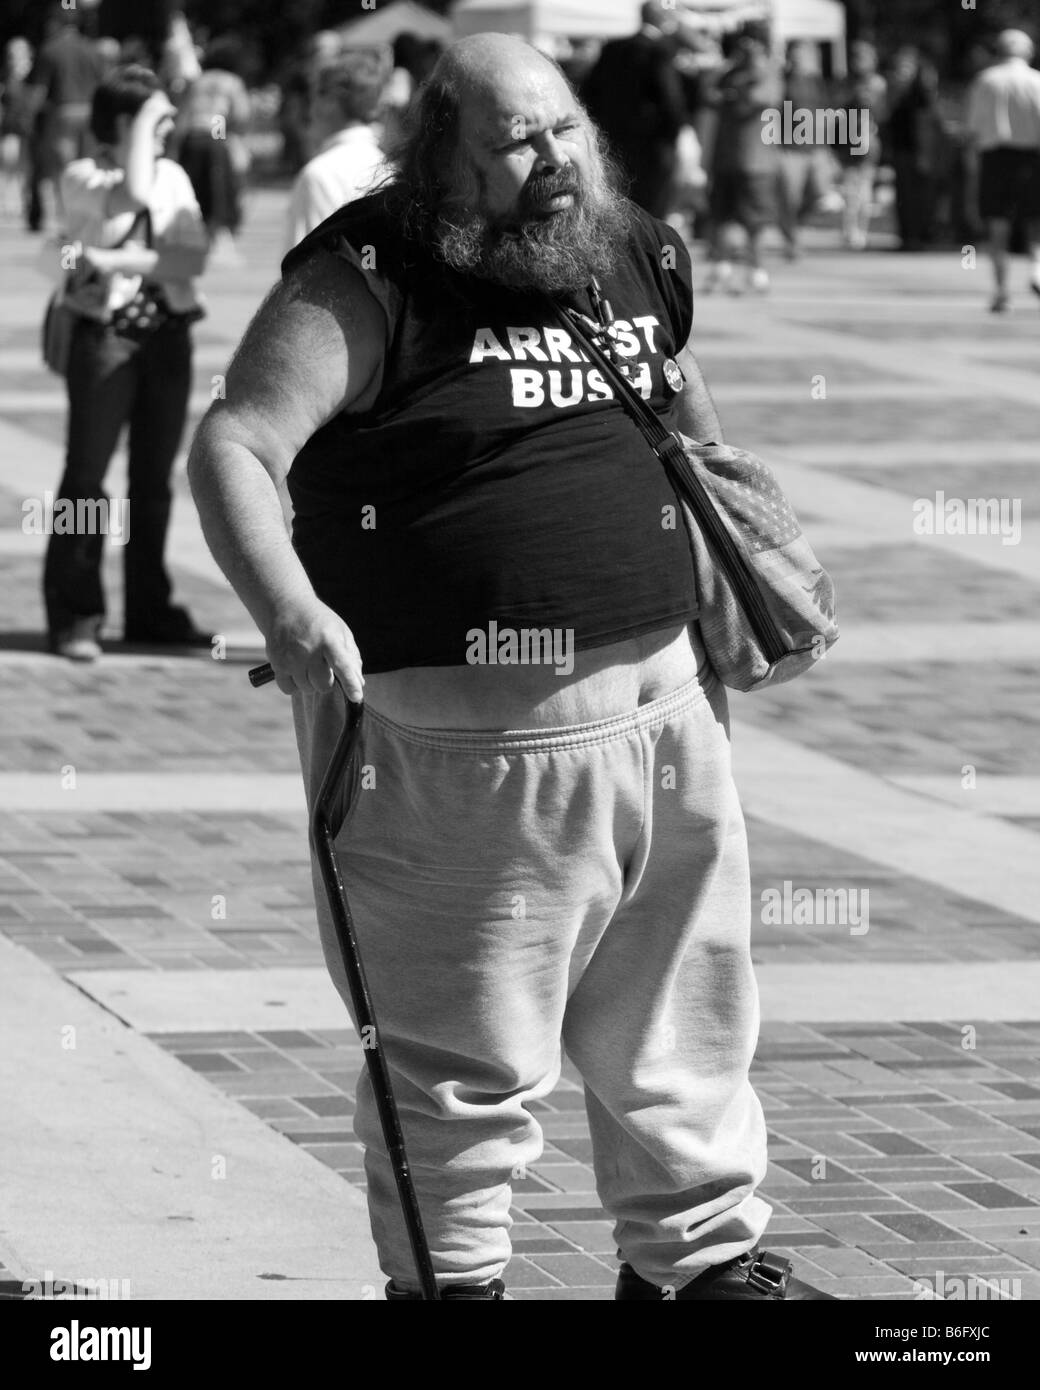 Man with 'Arrest Bush' t-shirt attends Recreate68 Rally during Democratic National Convention in Denver, Colorado Stock Photo